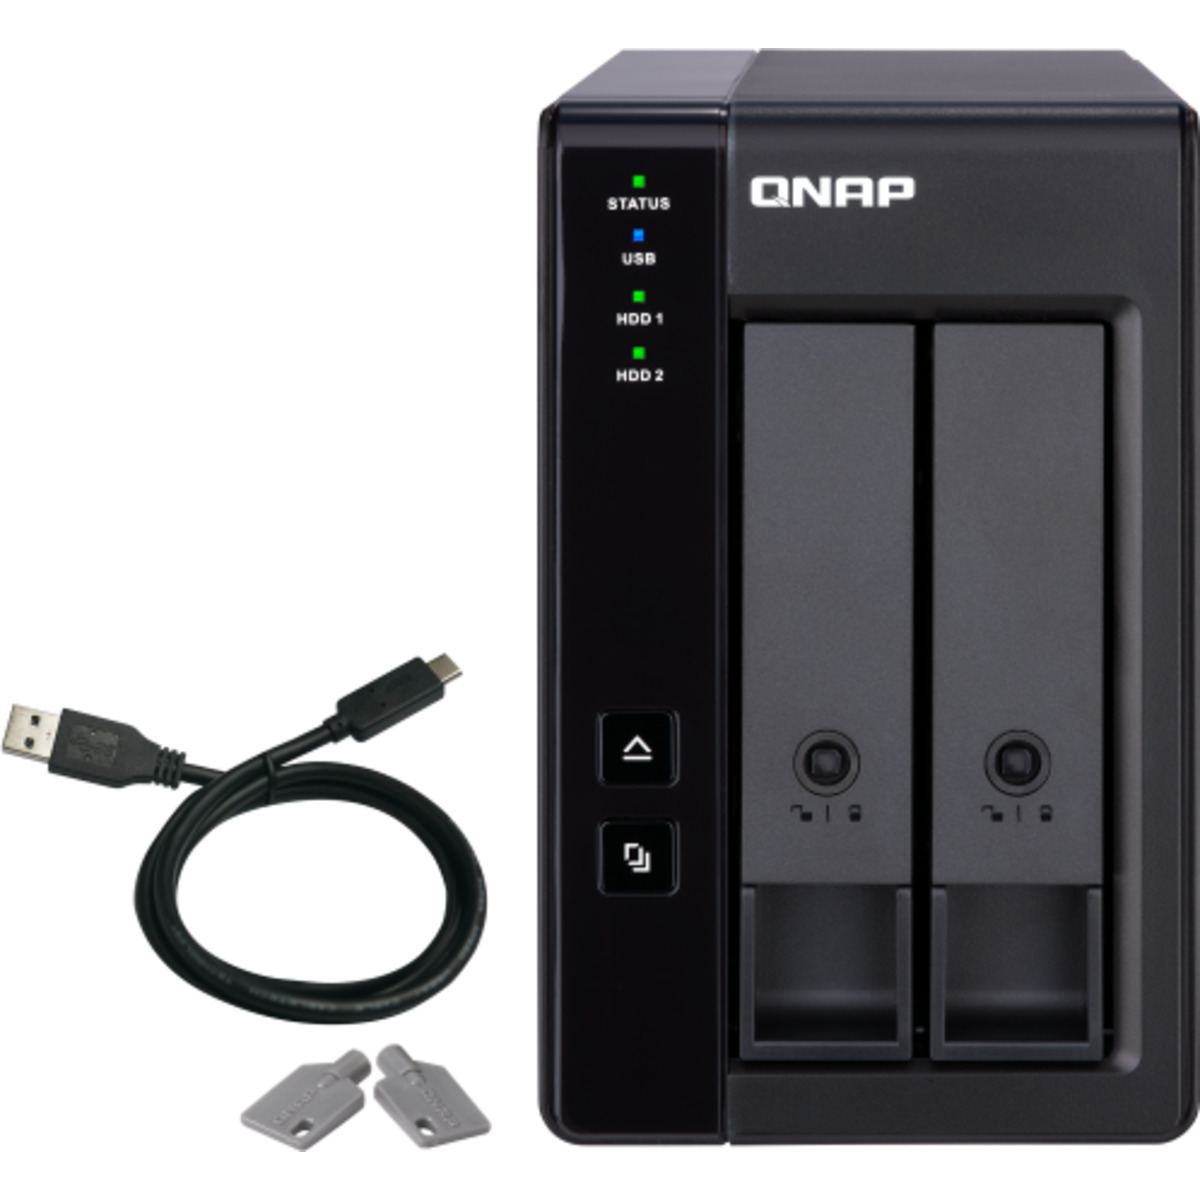 QNAP TR-002 External Expansion Drive 8tb 2-Bay Desktop Multimedia / Power User / Business Expansion Enclosure 2x4tb Seagate IronWolf Pro ST4000NE001 3.5 7200rpm SATA 6Gb/s HDD NAS Class Drives Installed - Burn-In Tested TR-002 External Expansion Drive